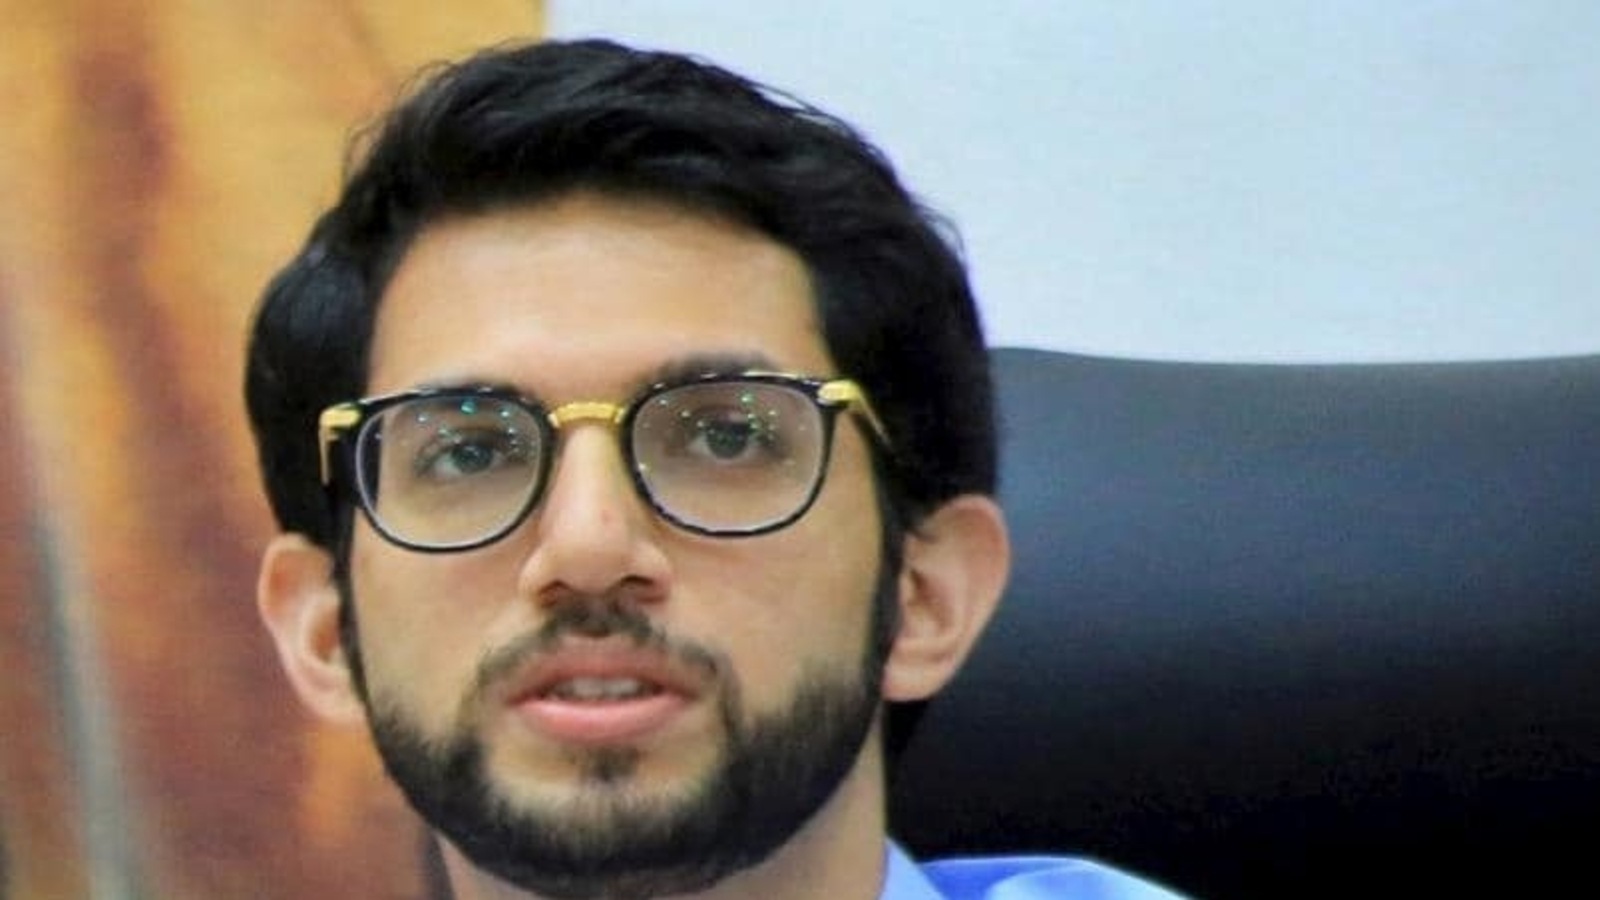 aaditya-thackeray-s-appeal-to-sena-workers-on-flood-whatever-the-political-situation-is